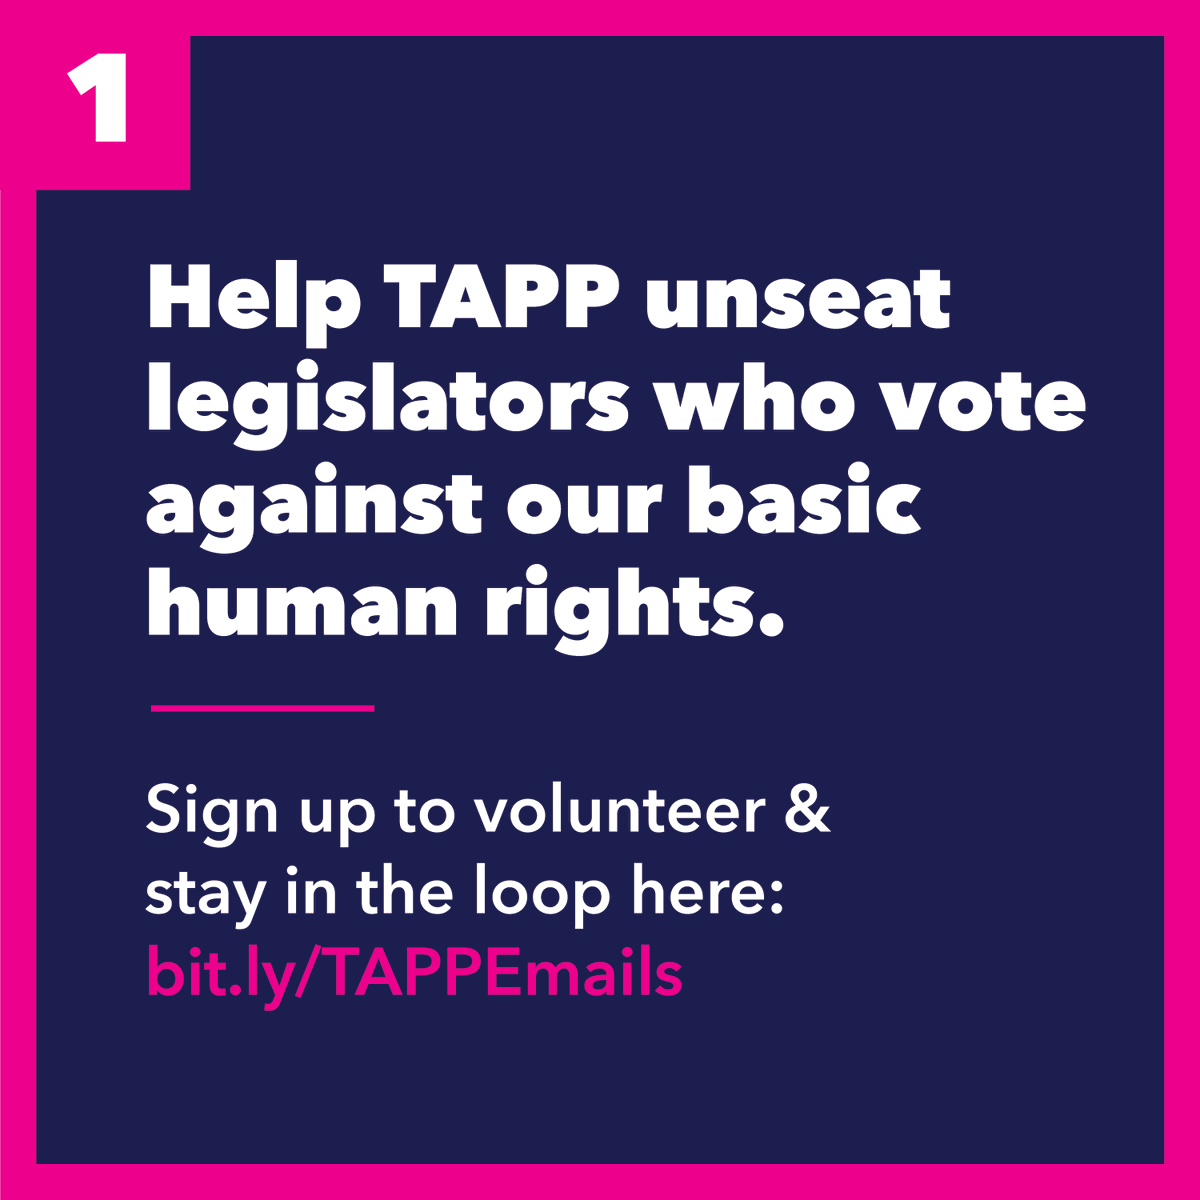 Help TAPP unseat legislators who vote against our basic human rights. Sign up to volunteer & stay in the loop here:  http://bit.ly/TAPPEmails  (2/6)